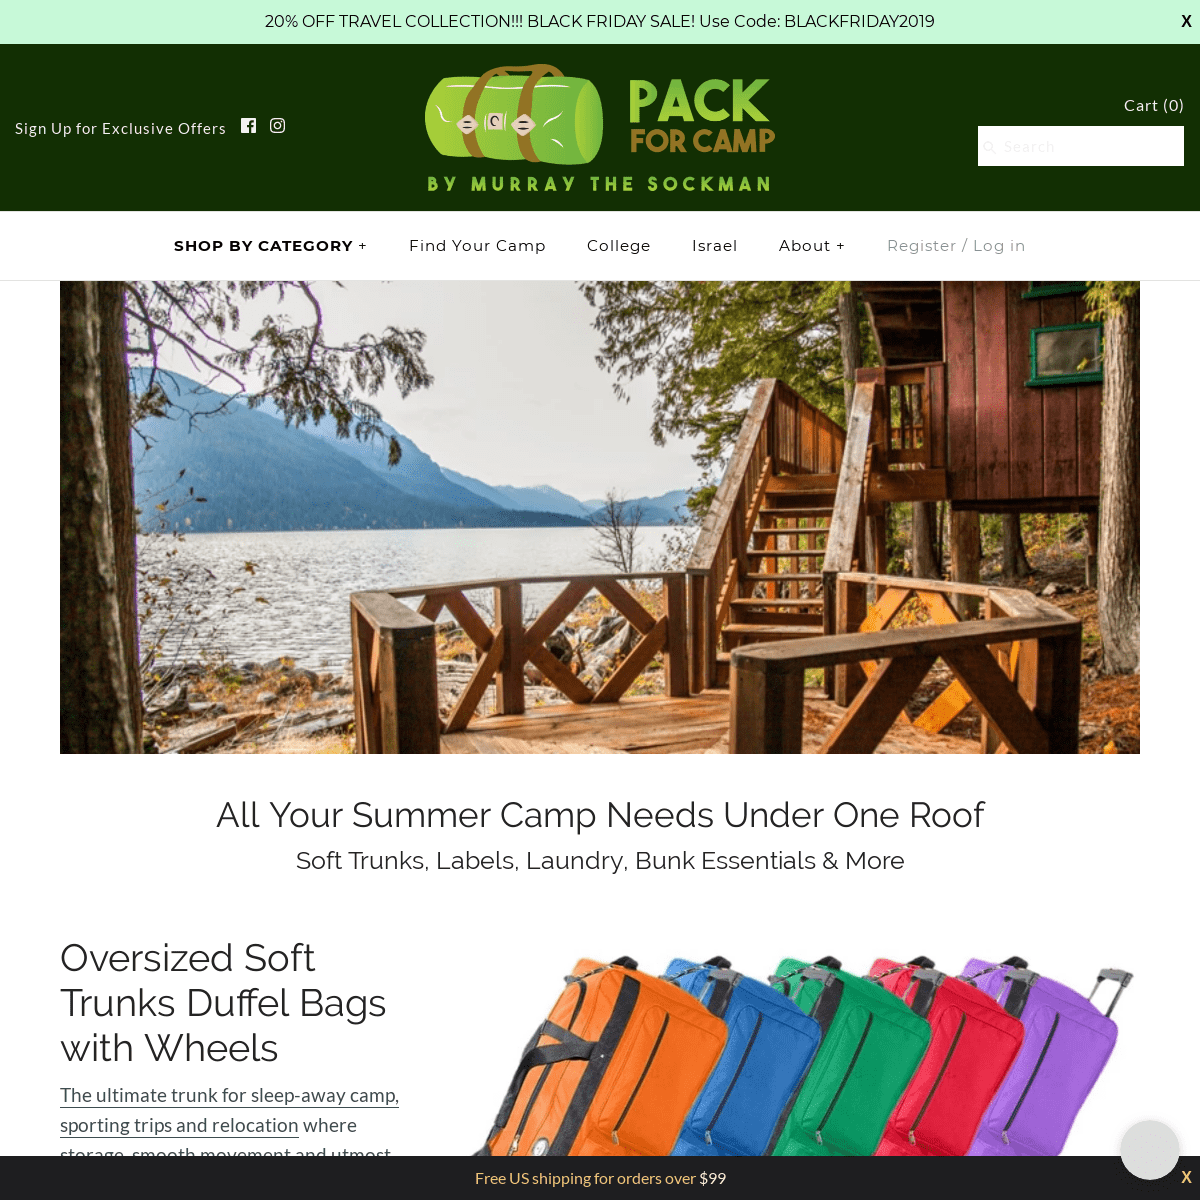 A complete backup of packforcamp.com